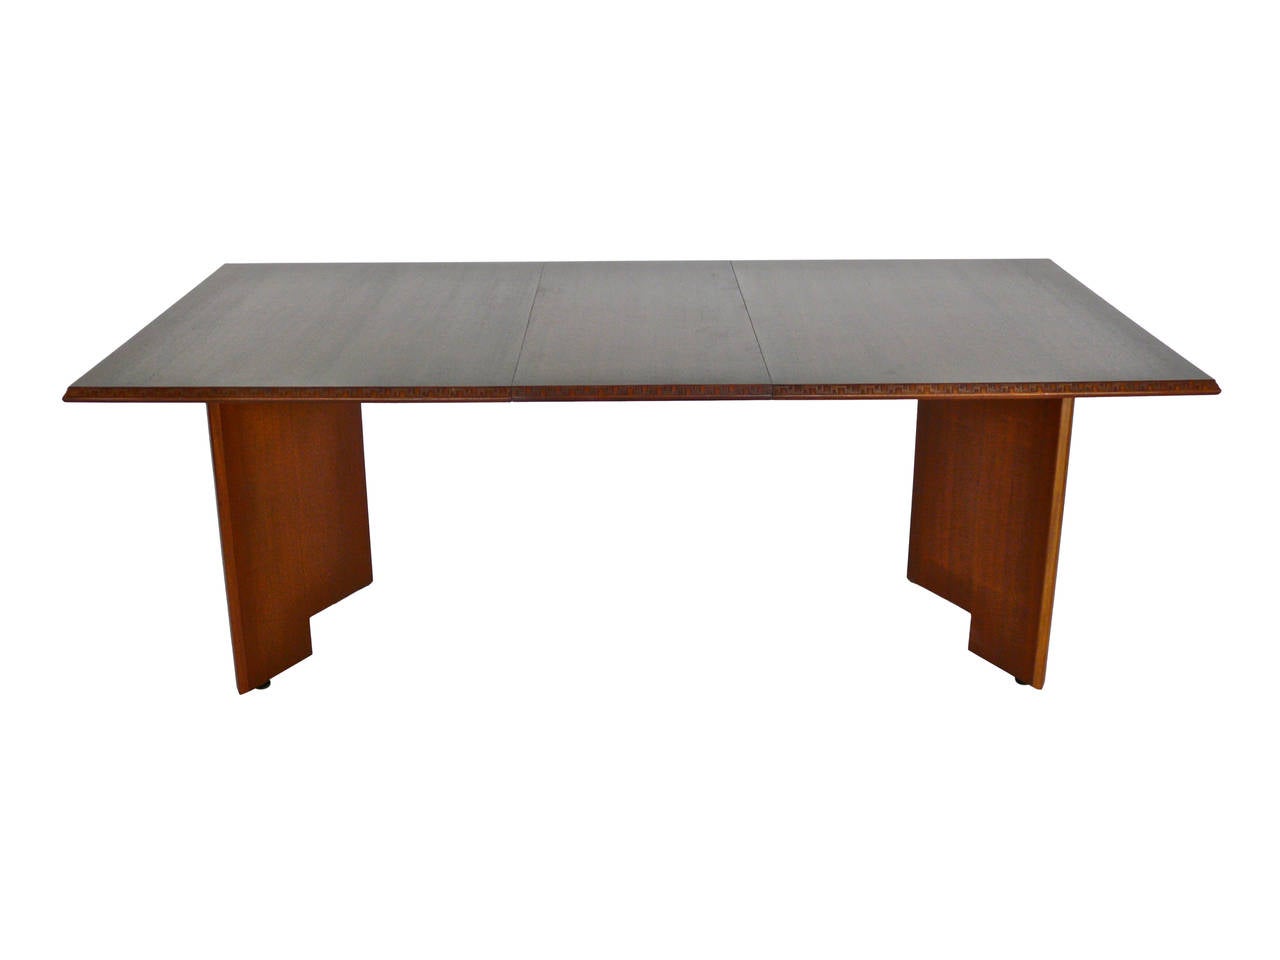 Handsome Frank Lloyd Wright dining table with two removable leaves manufactured by Heritage Henredon. Distinct carvings from the Taliesin Line which was named after Frank Lloyd Wright's home in Spring Green, Wisconsin. Mahogany table has been newly